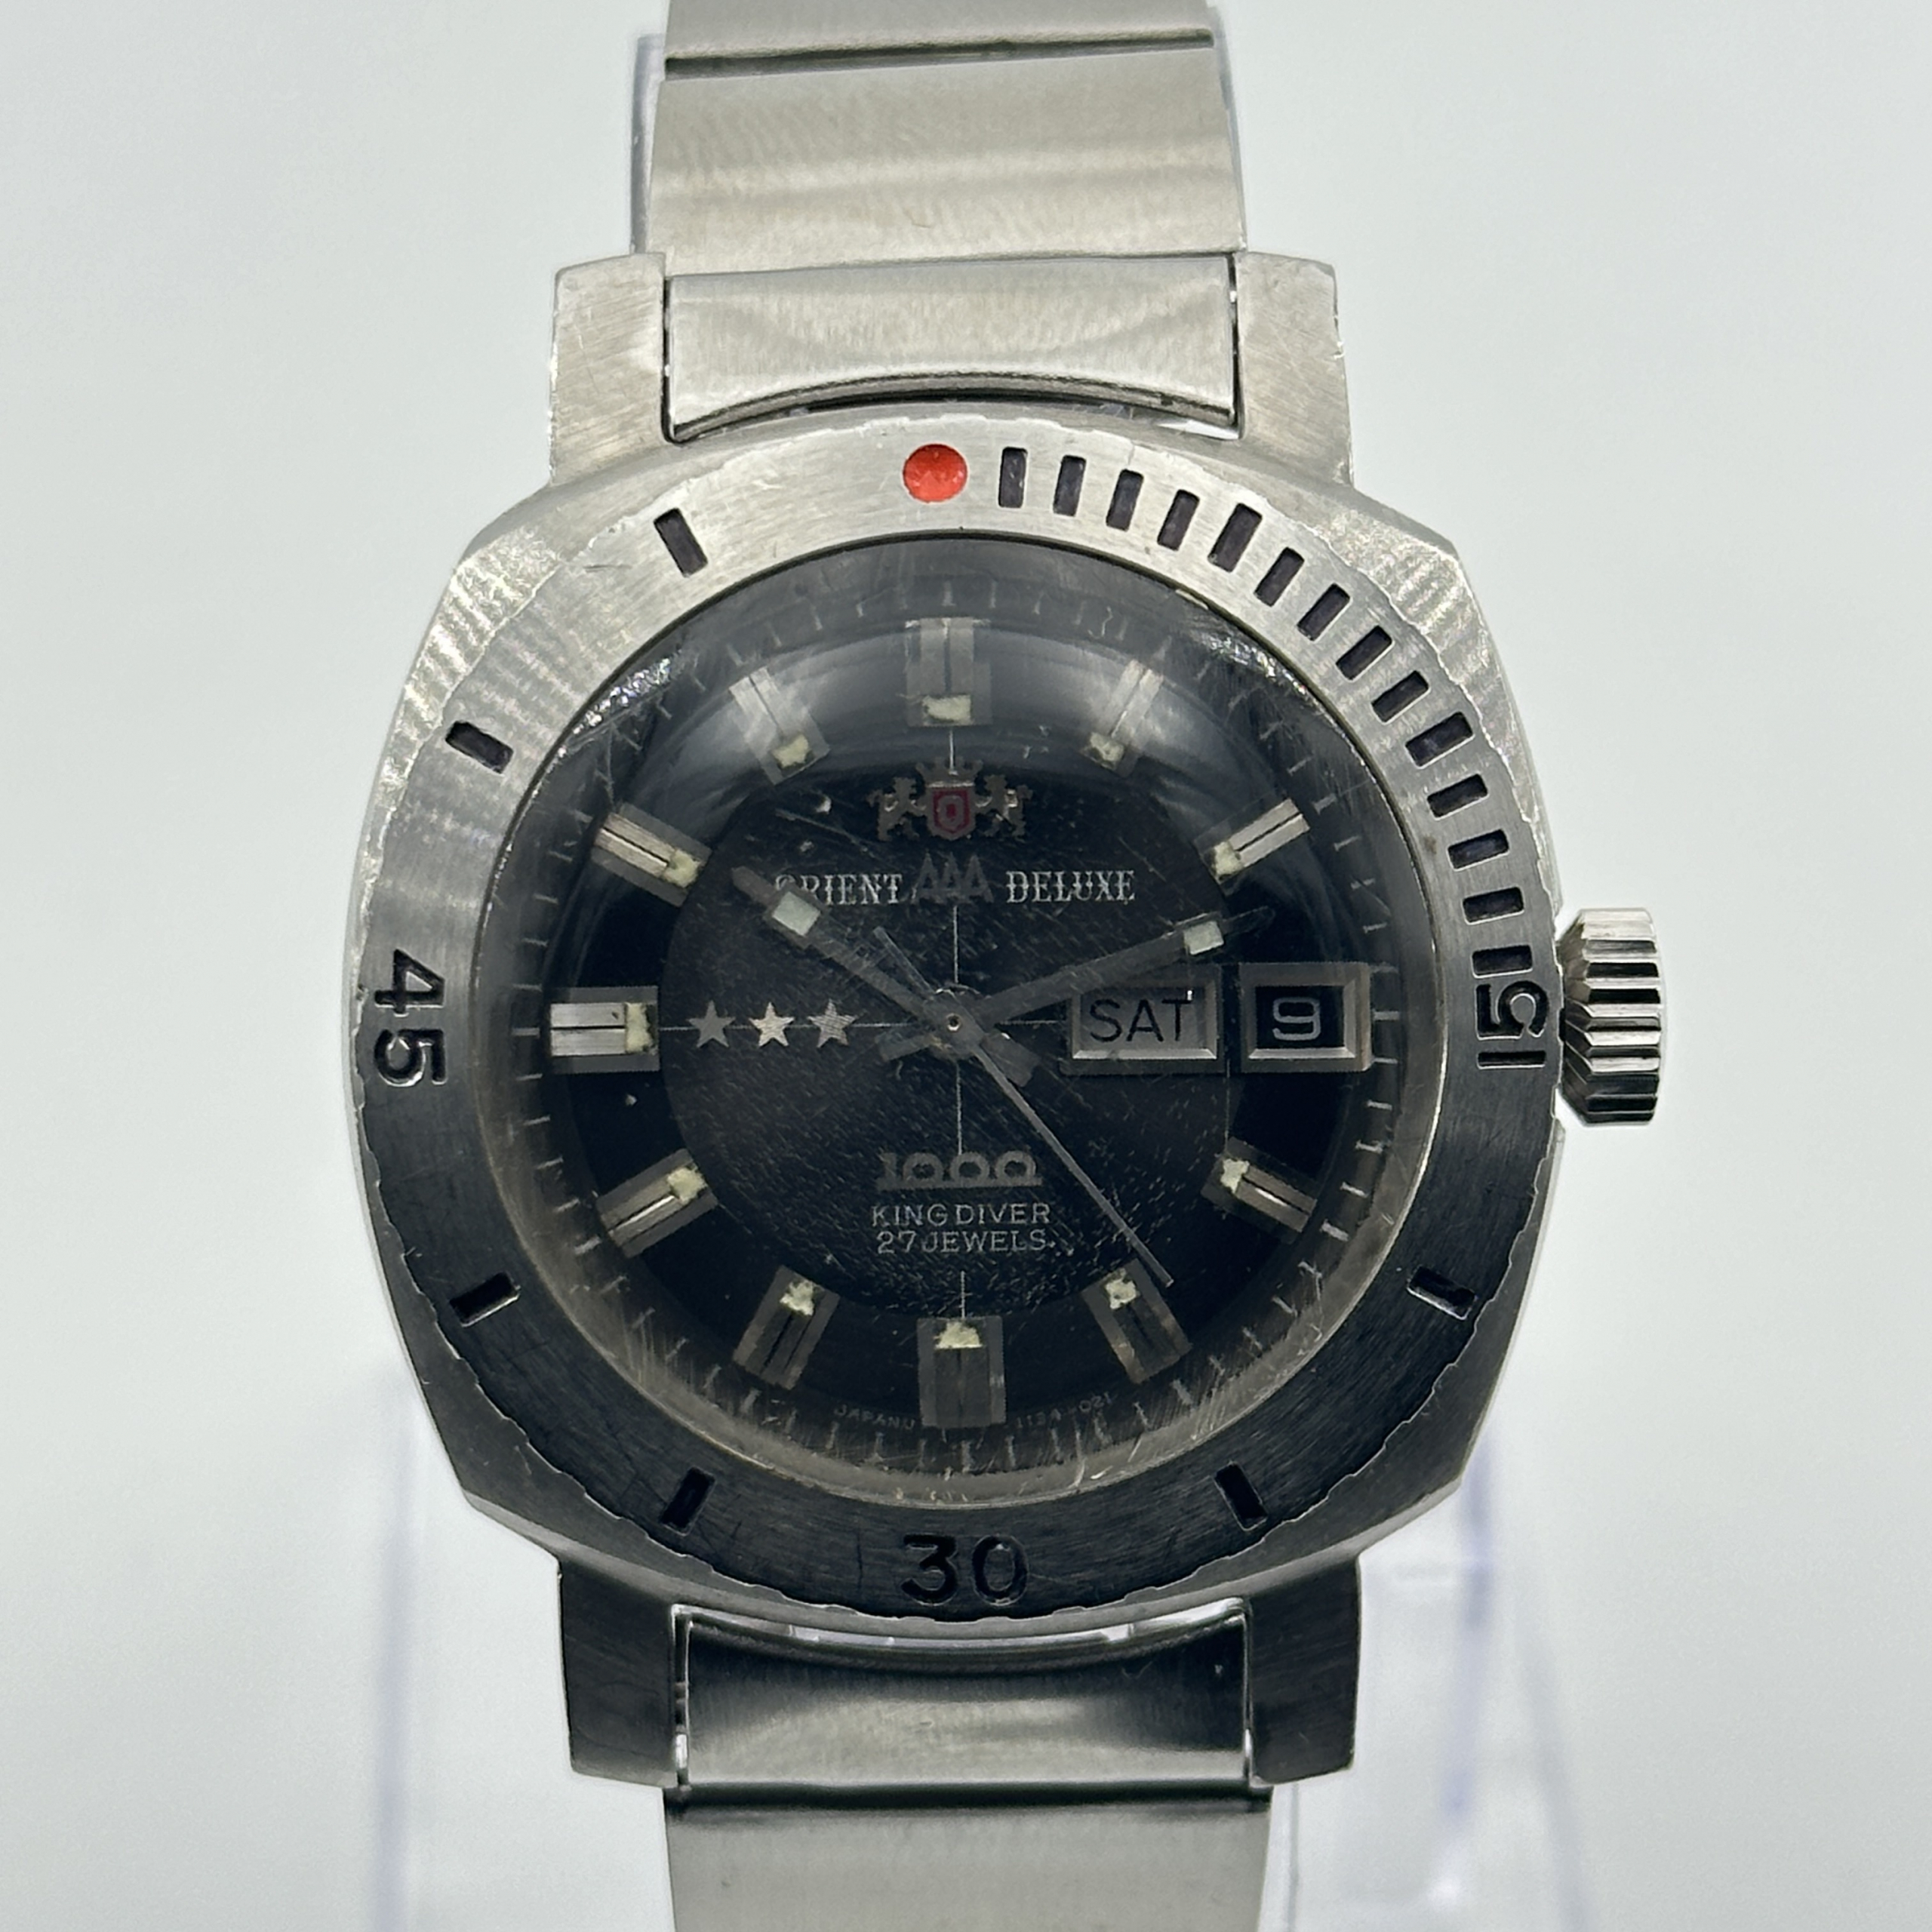 Orient King Diver Baby Pam MaurenceMonkey